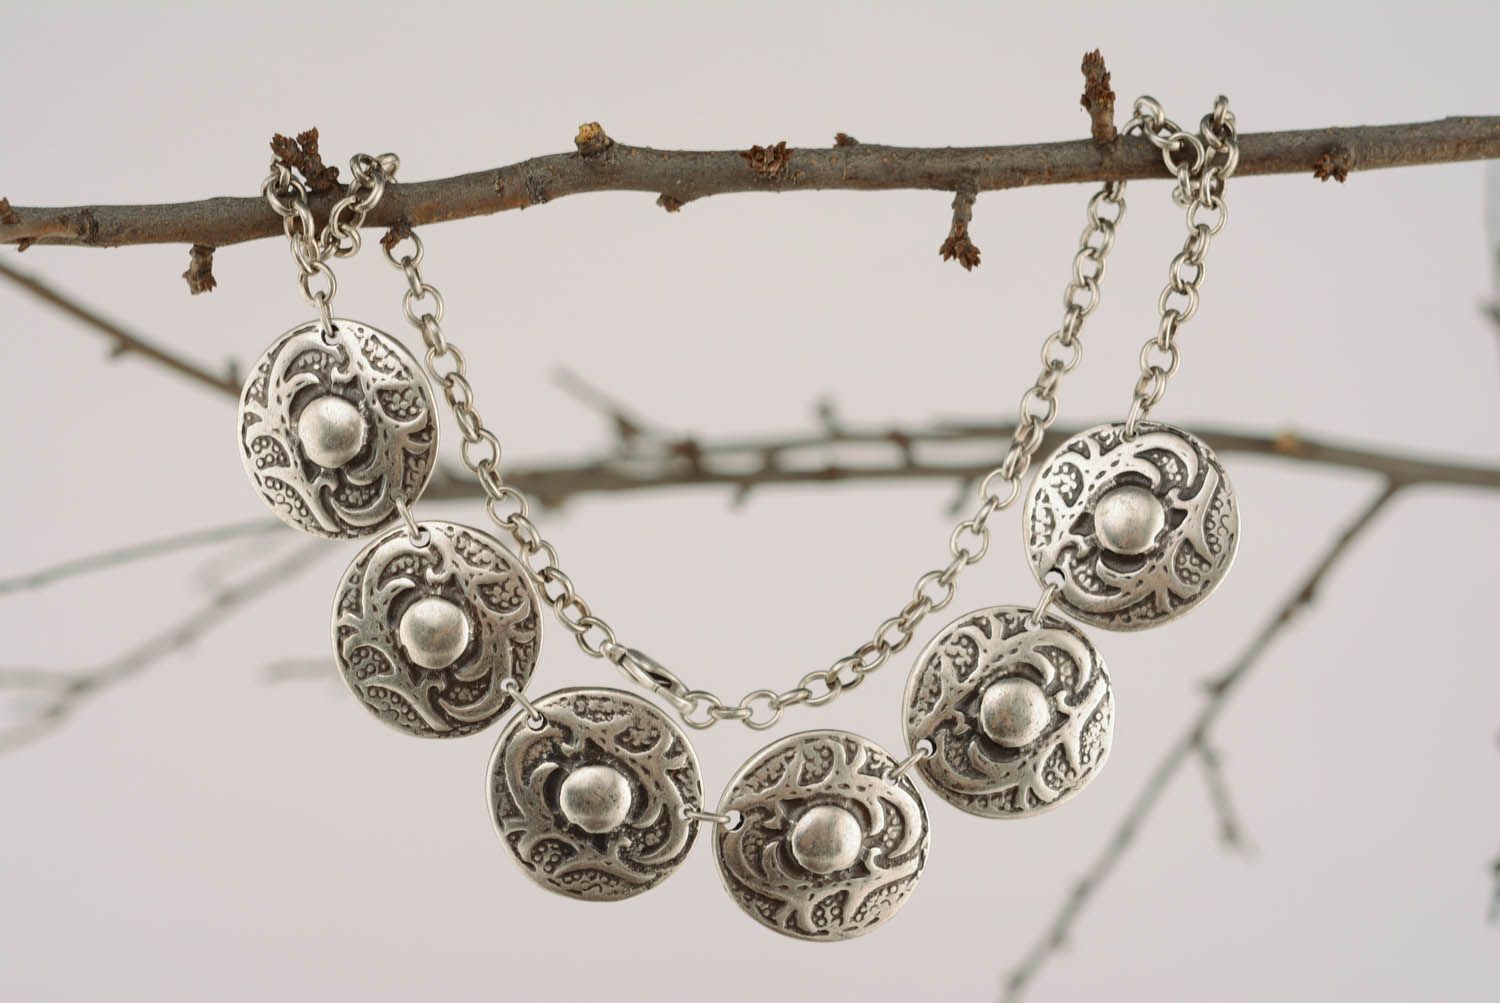 Necklace made of metal alloy photo 1